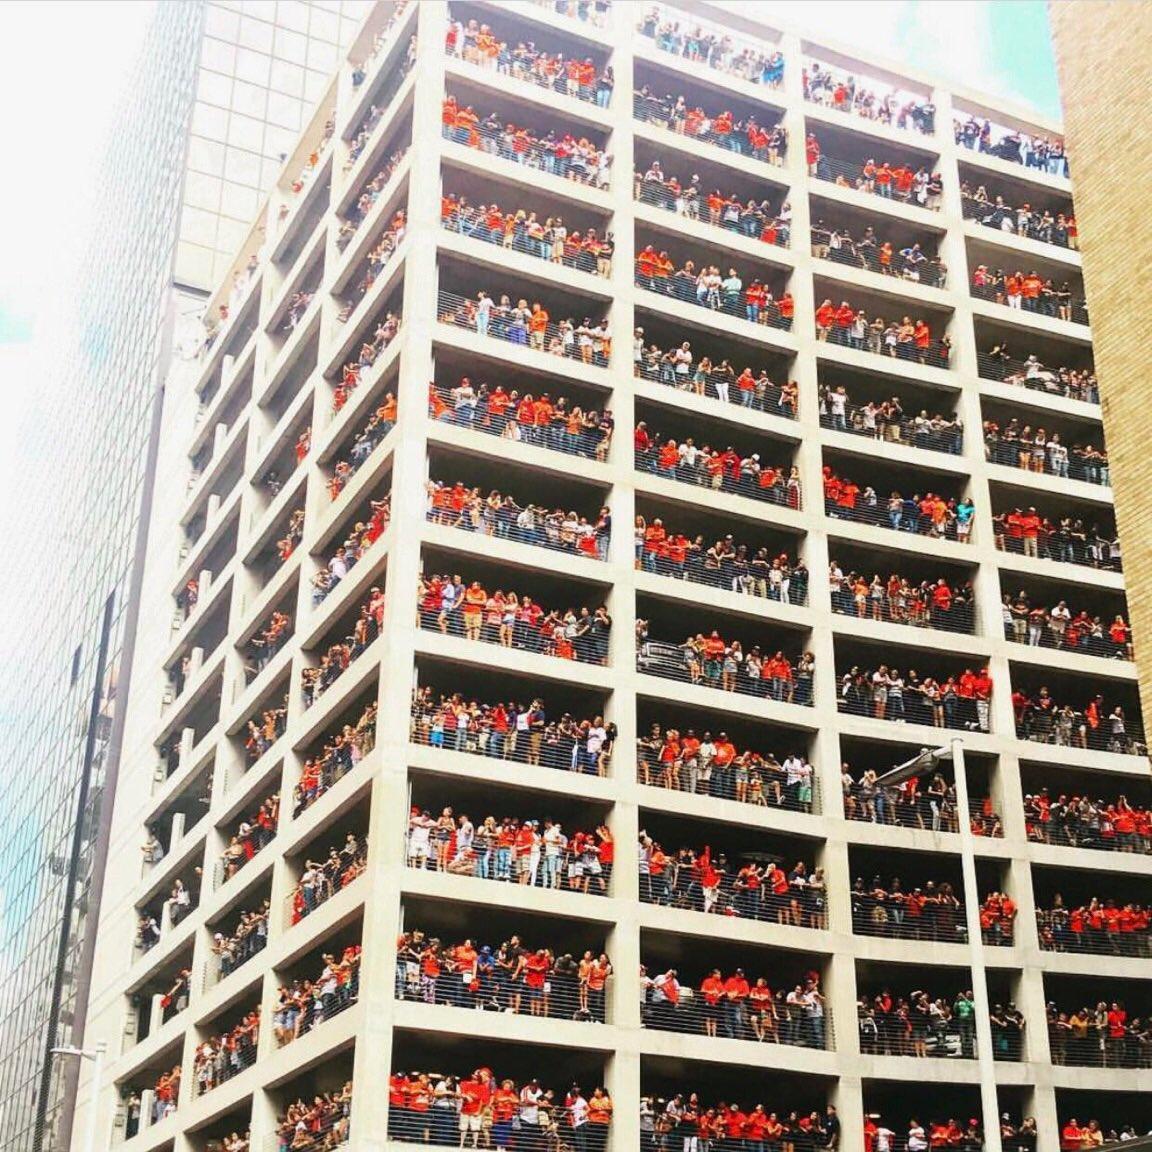 View of the parking garage overlooking the Astros parade